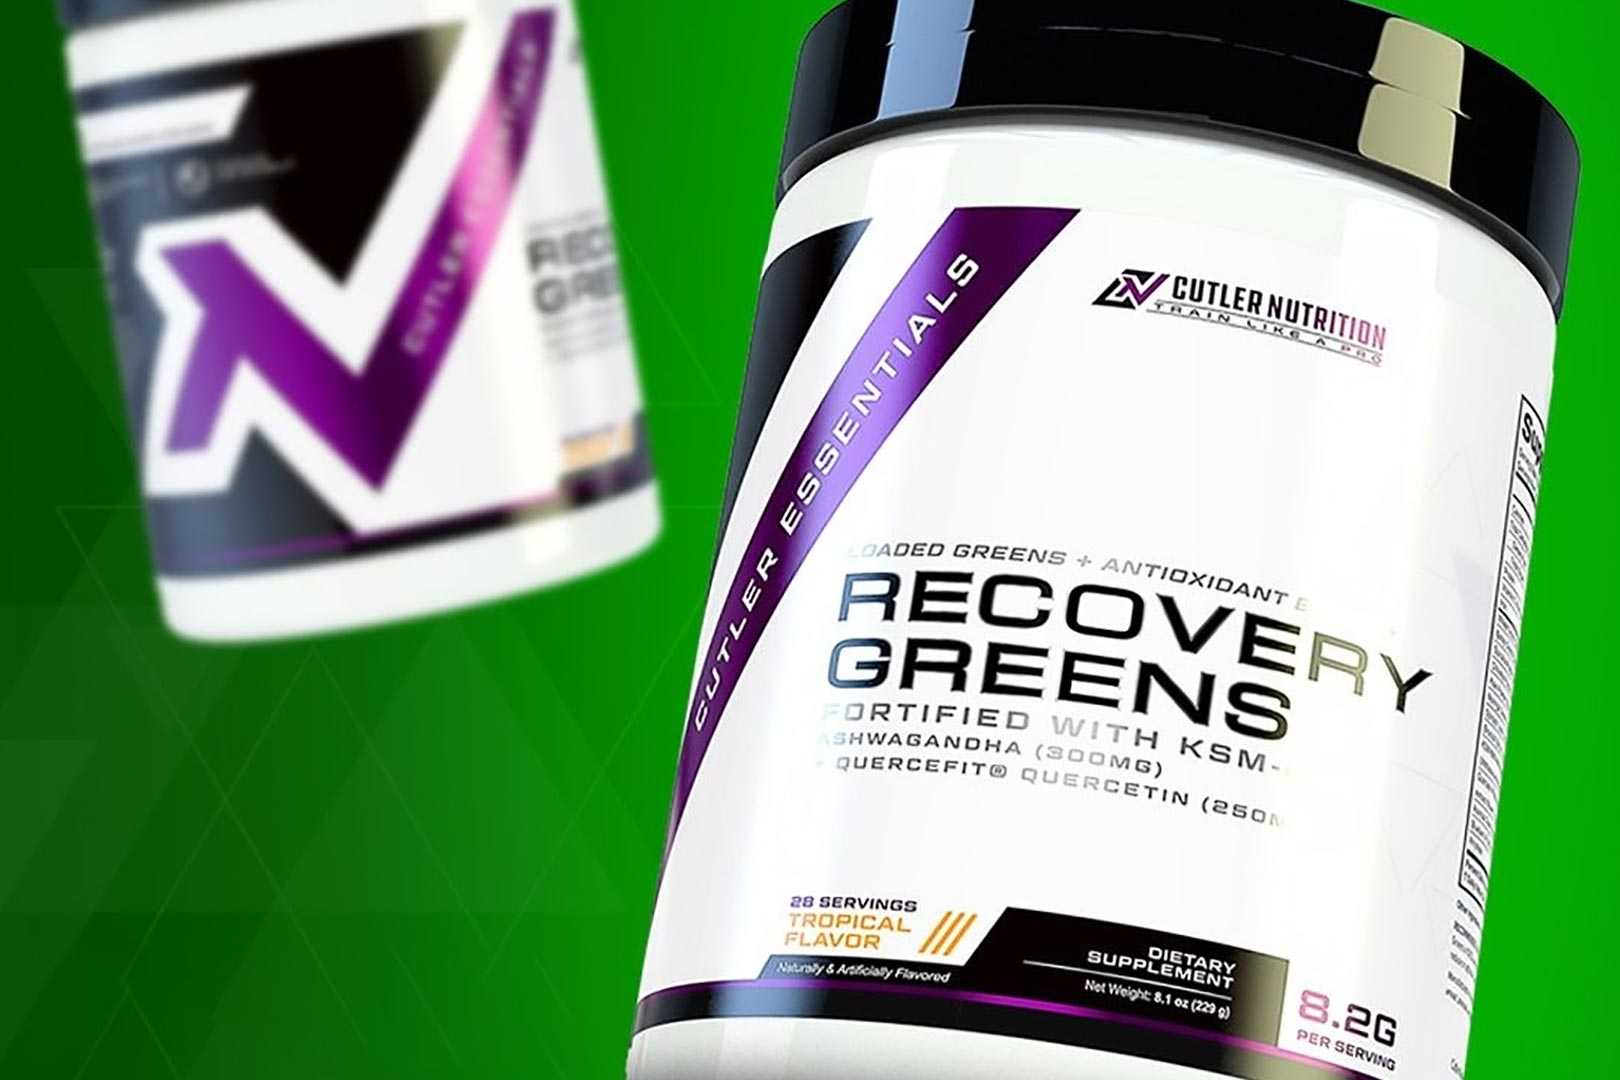 Cutler Nutrition Recovery Greens